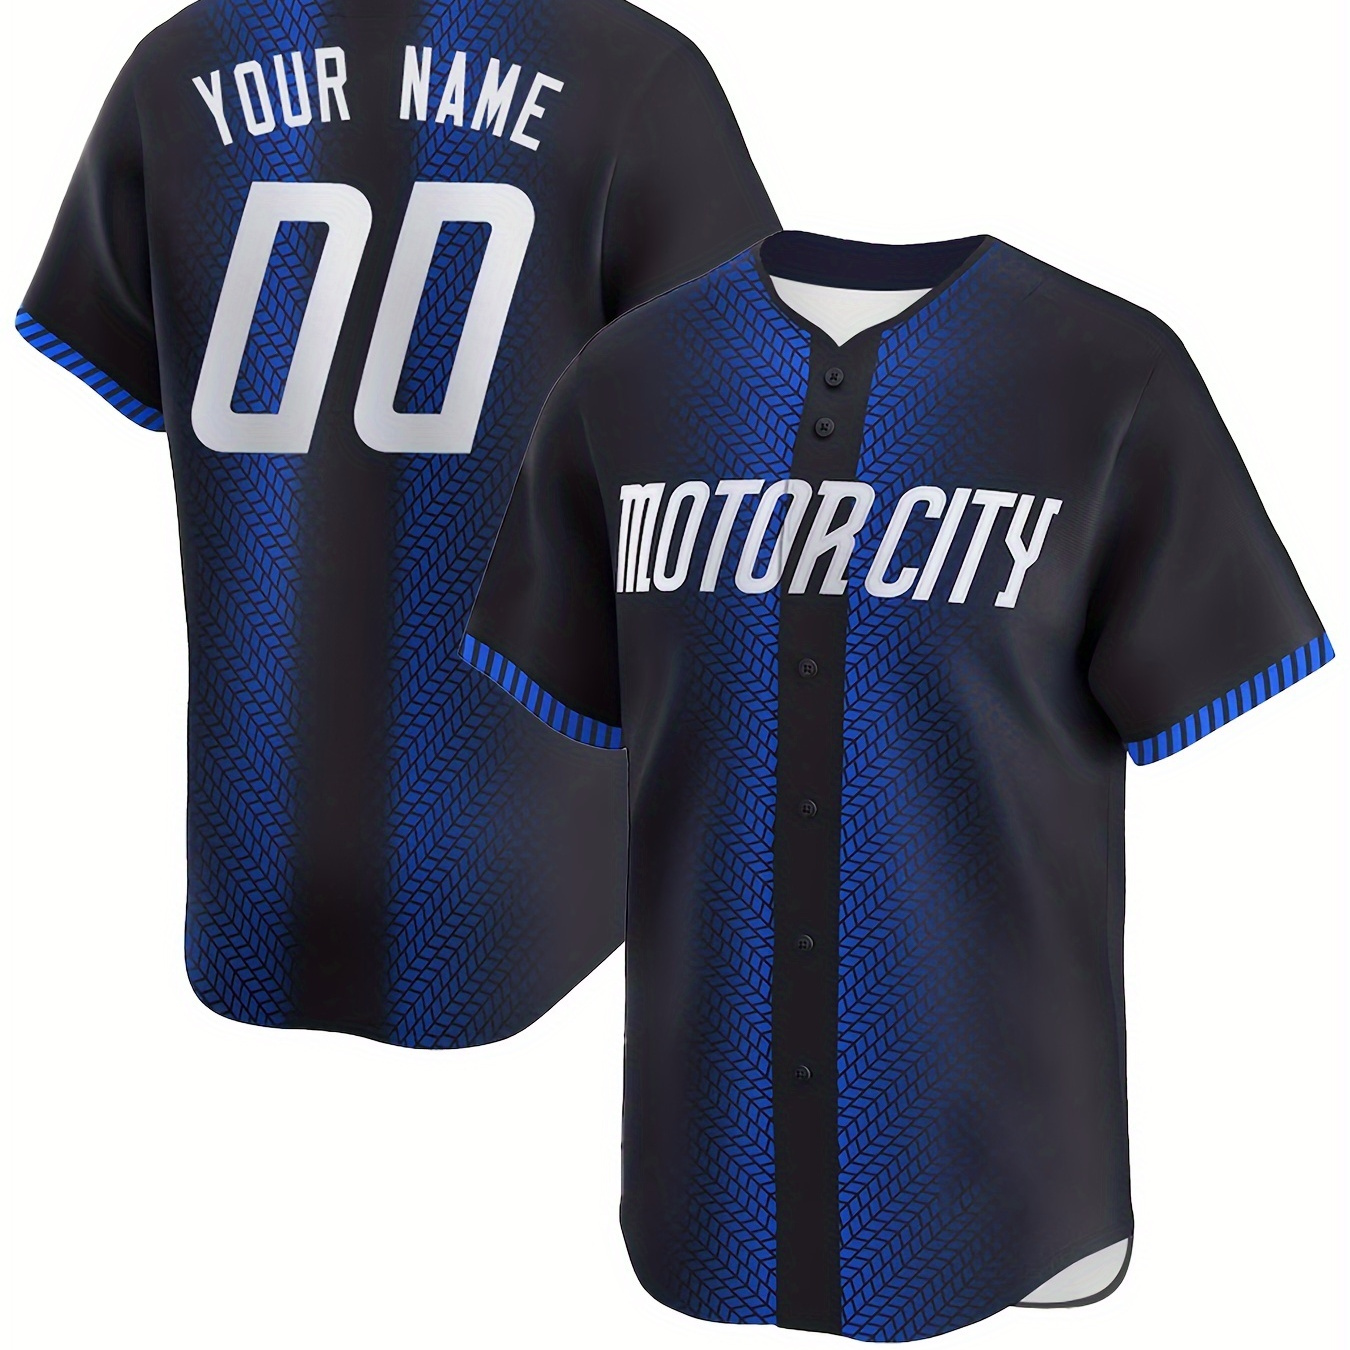 

Customizable Name And Number Men's Baseball Jersey With Embroidered Pattern, Leisure Outdoor Sports Customized S-3xl